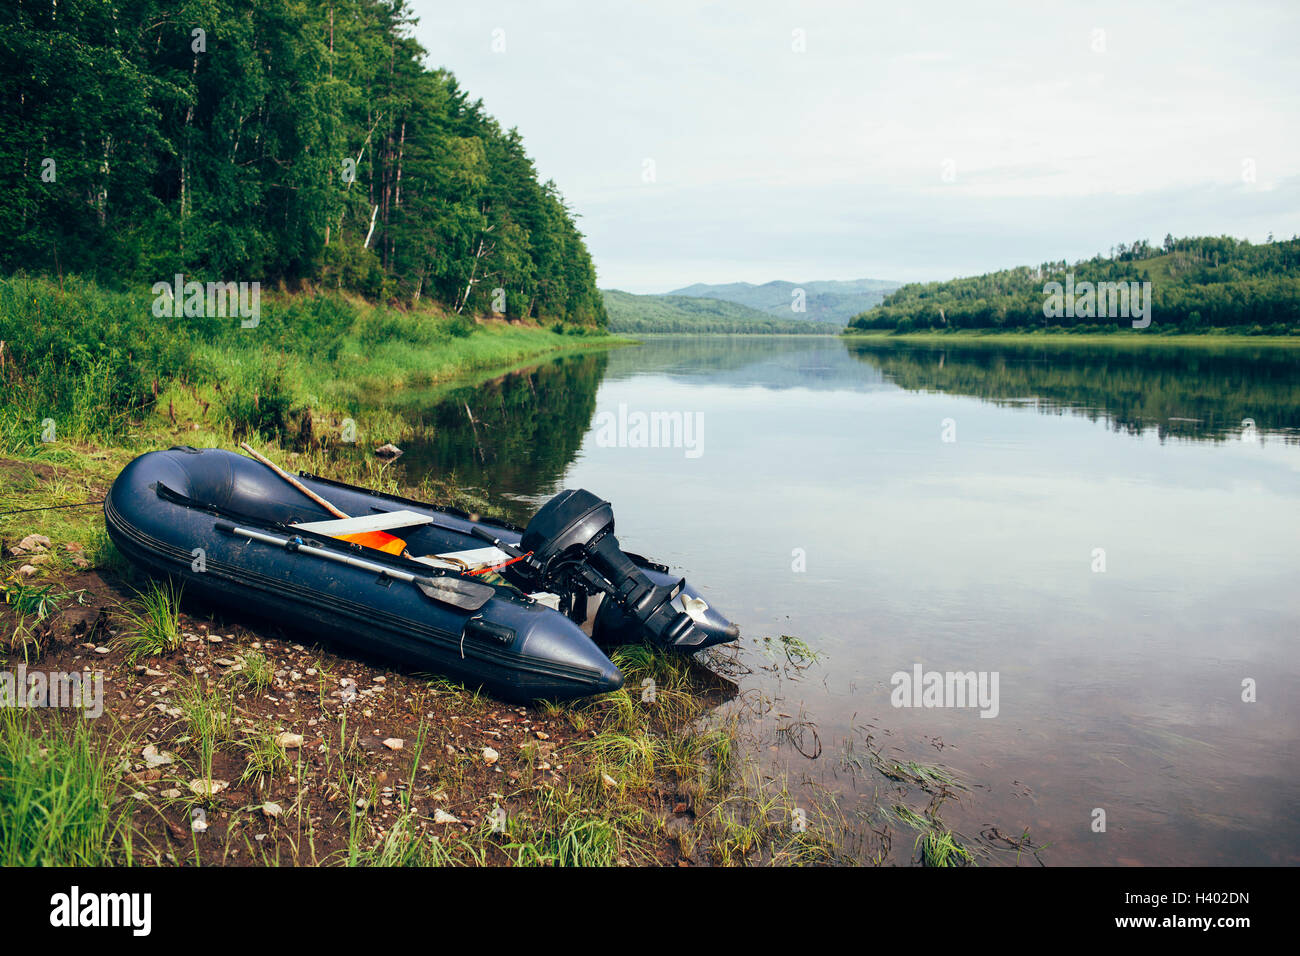 Inflatable motorboat moored at riverbank in forest against sky Stock Photo